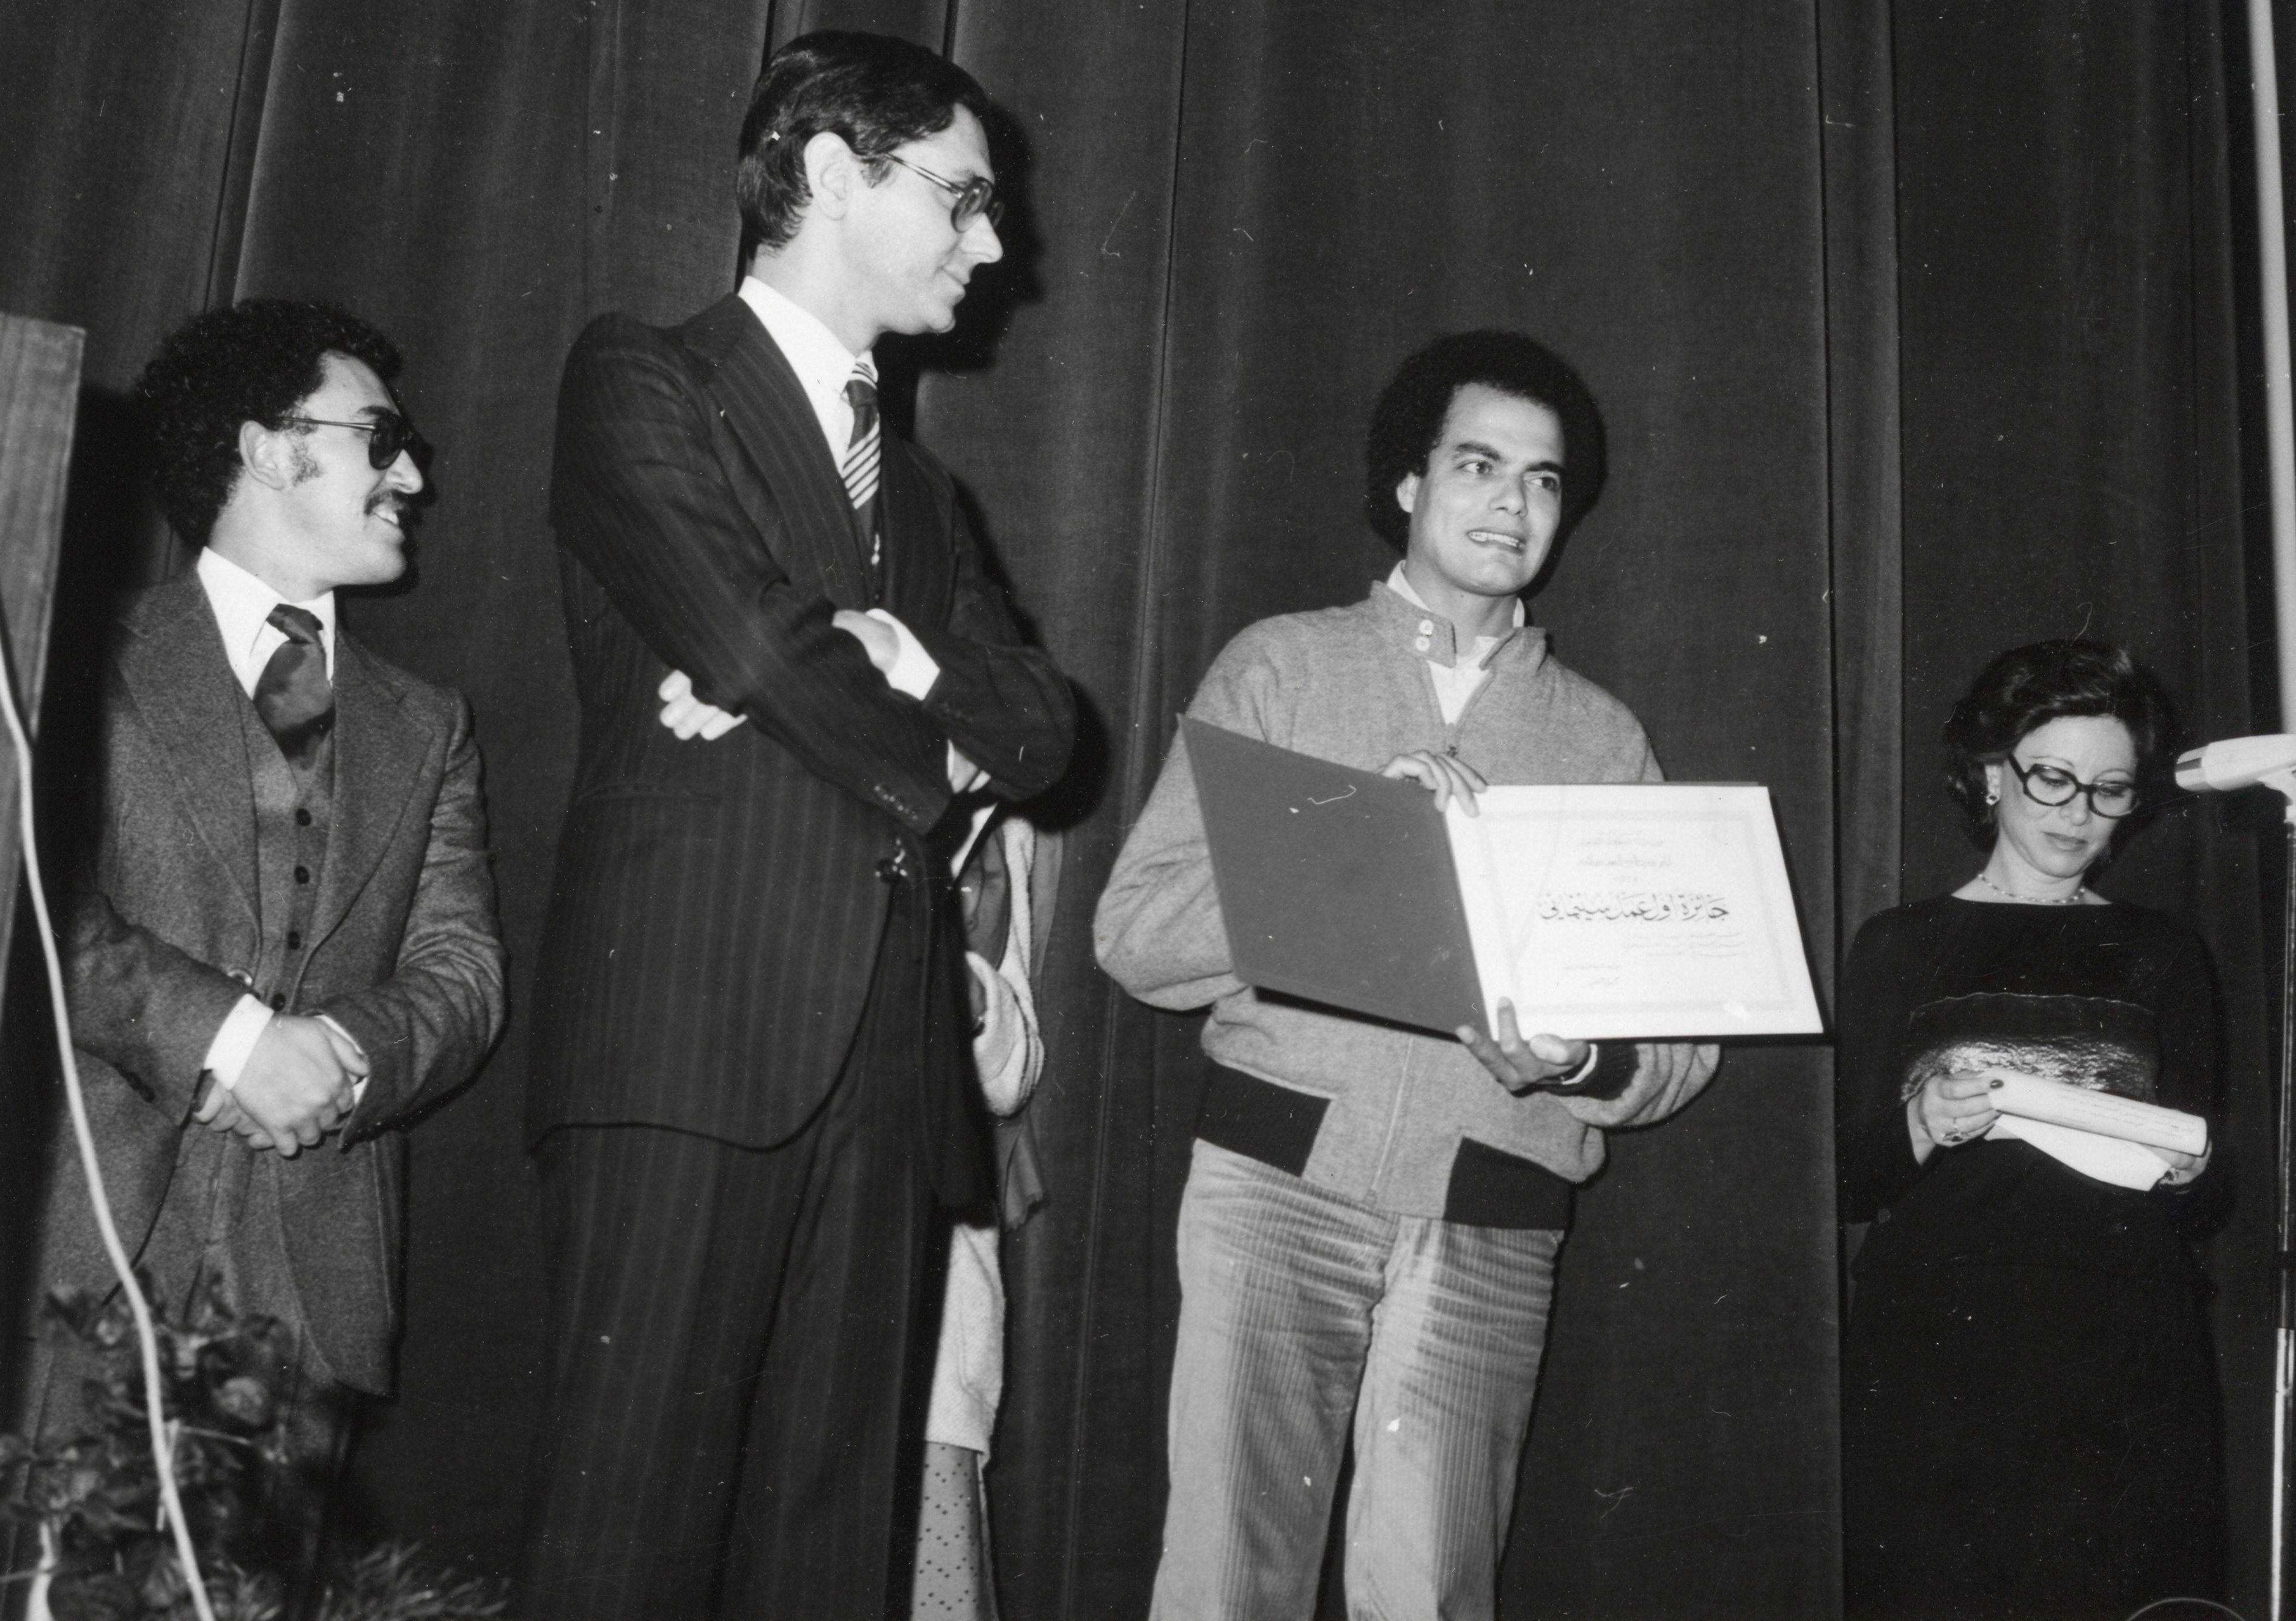 Hammadi Essid, Director of the JCC in 1987, presenting an award to the Moroccan filmmaker Ahmed El Maanouni in the presence of the jury president, chosen by him, the Egyptian star Faten Hamama.